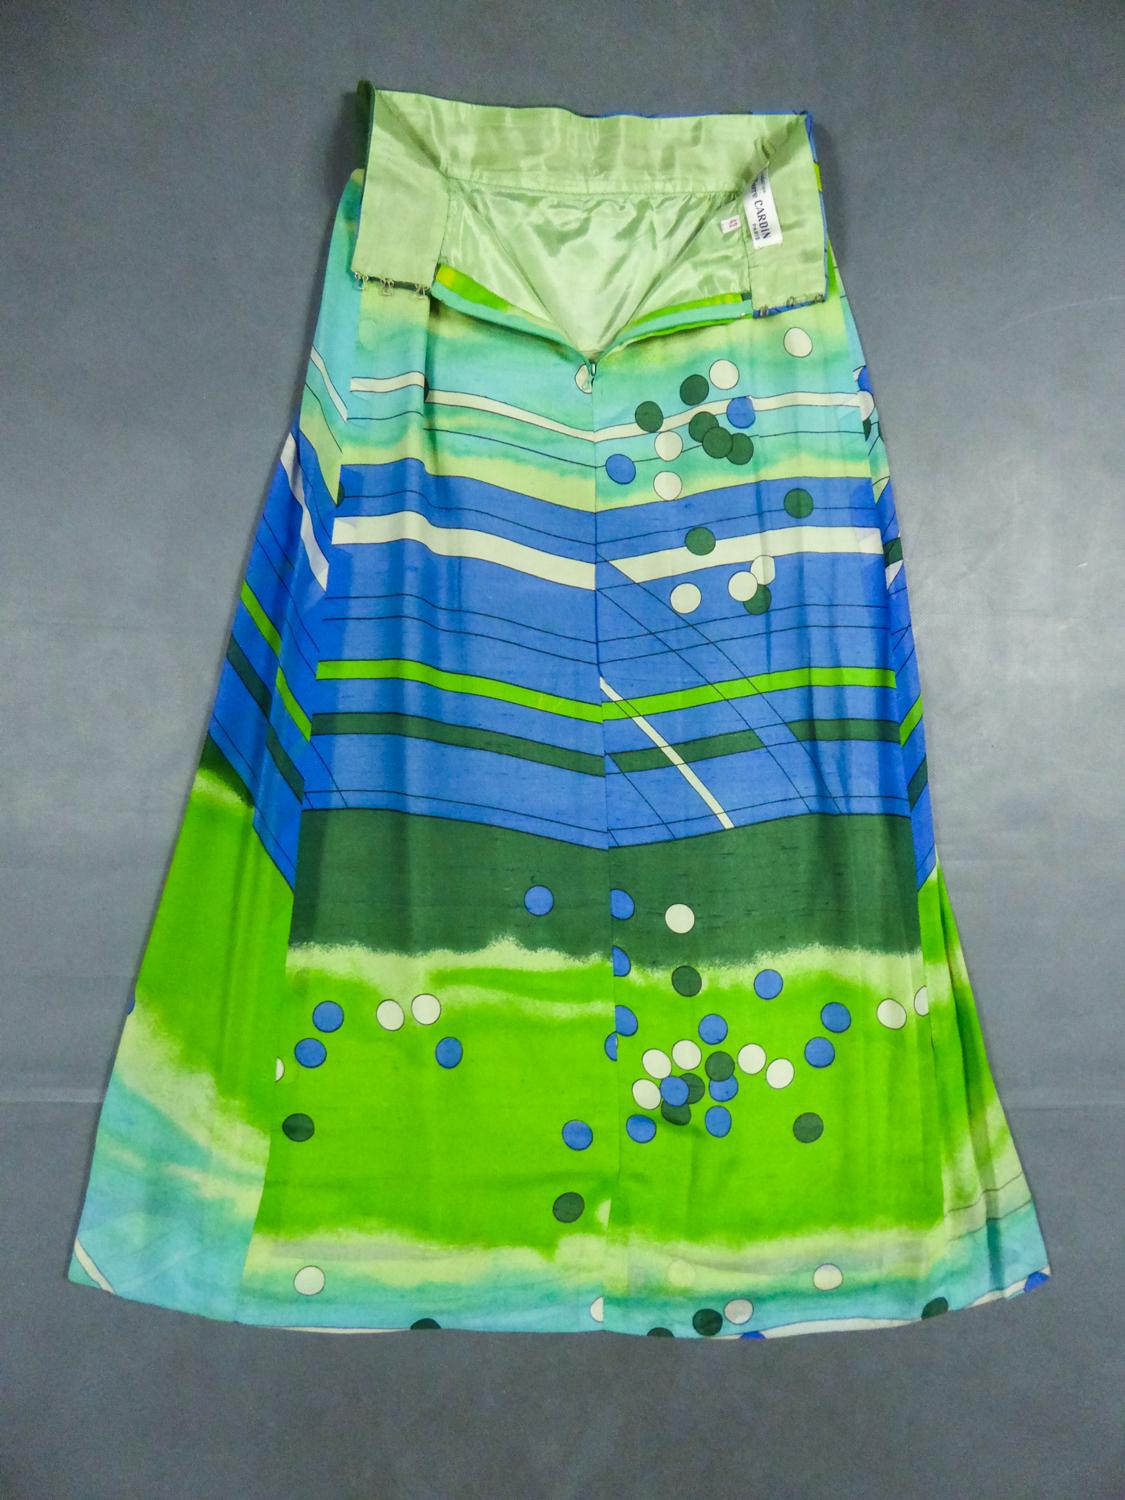 Circa 1975/1980
France

Long skirt by Pierre Cardin Paris Circa 1980. Silk crepe printed in tones of green and blue colors with patterns of geometric lines and circles of Modernist taste. Large waist belt and large box pleats at the front giving the